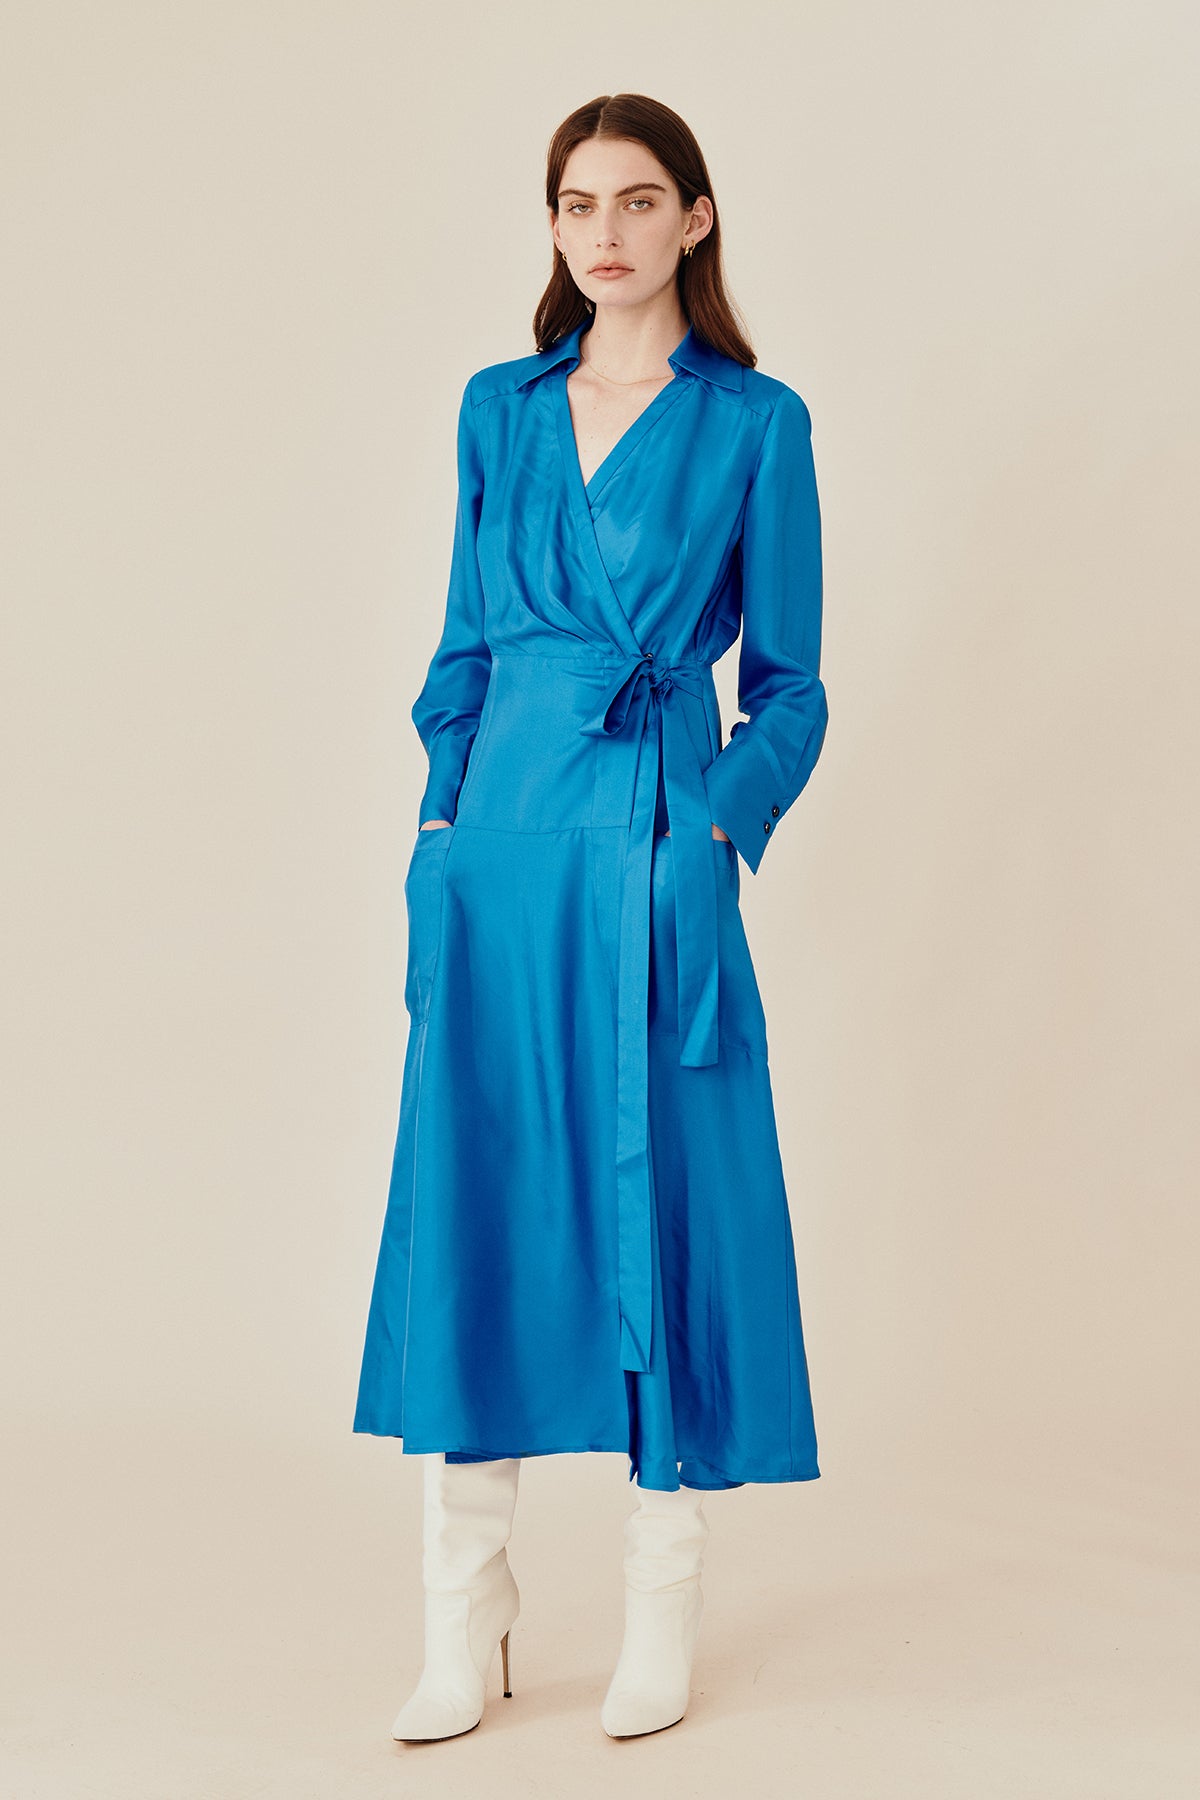 Model wearing Australian fashion designer GINGER & SMARTS' blue silk Libertine that is the classic wrap silhouette that features a sharp collar and gently flared skirt with a long shirt sleeve.  